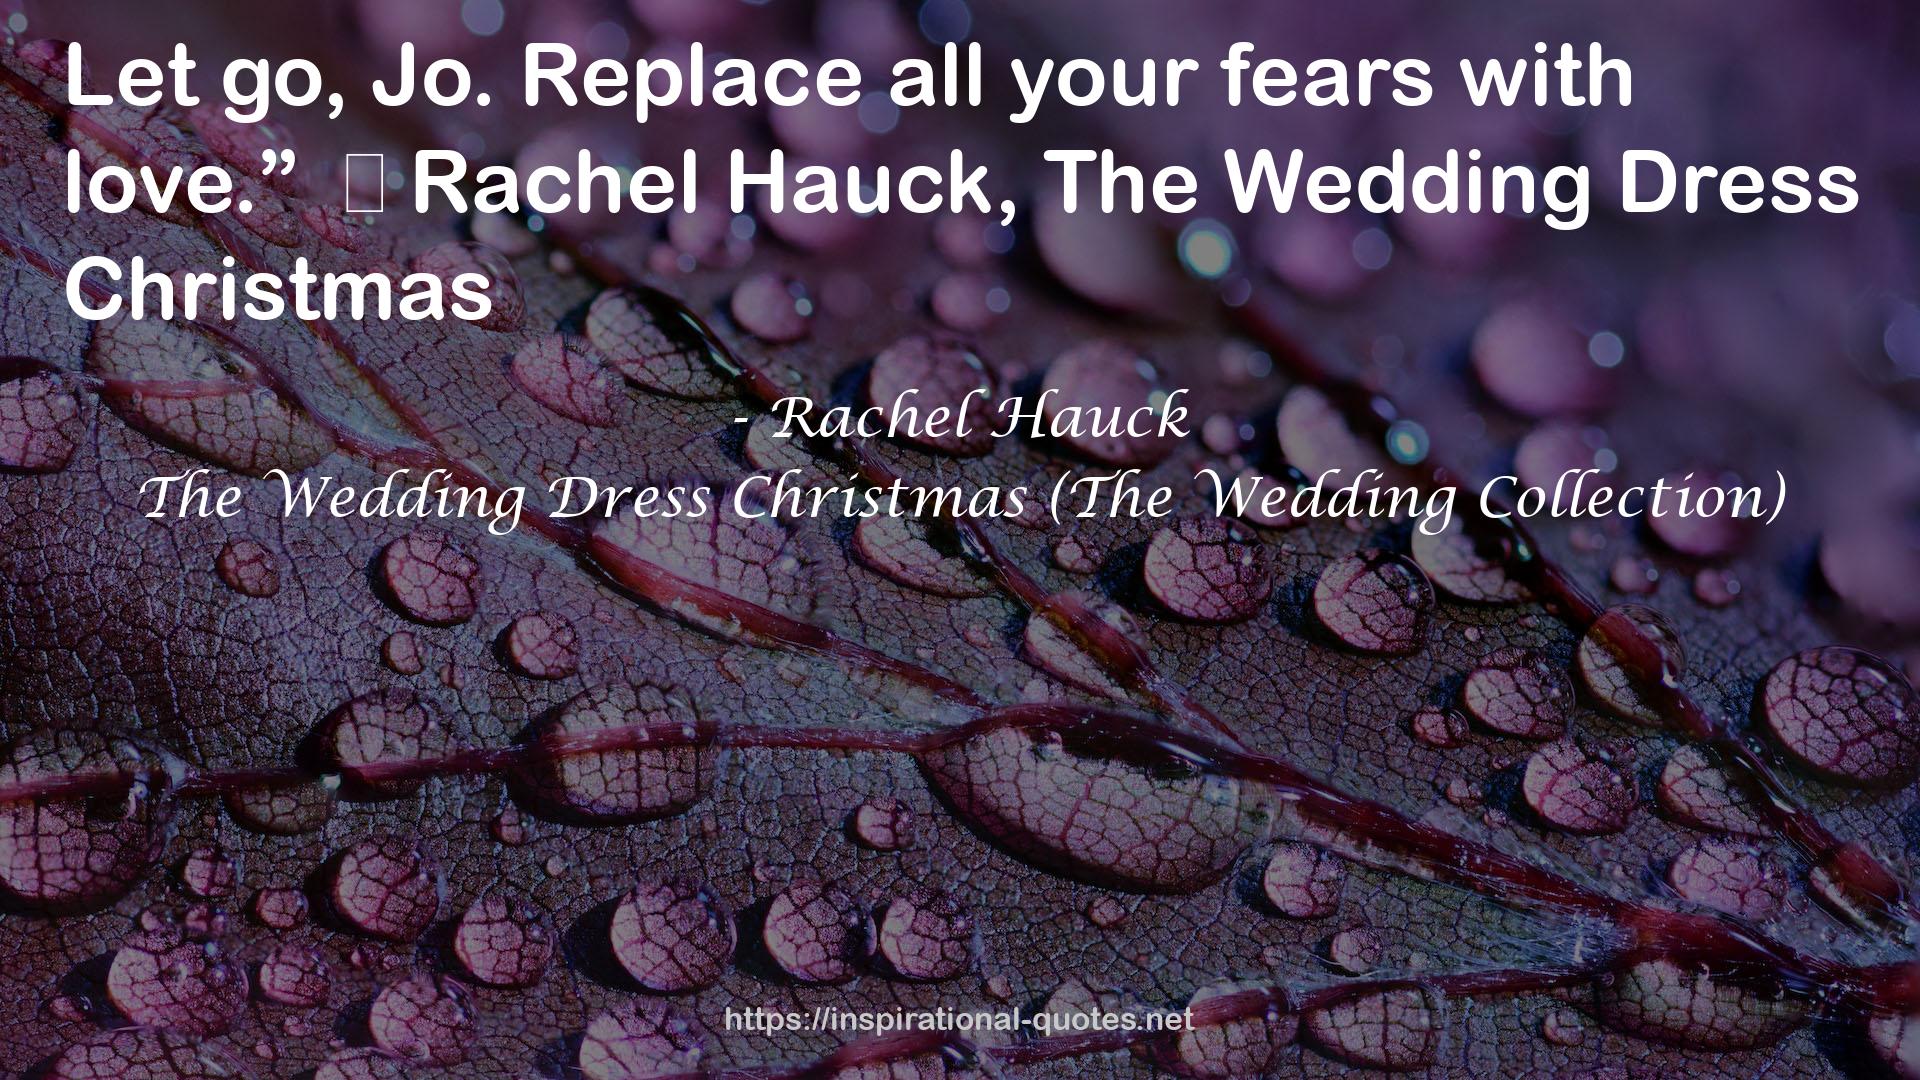 The Wedding Dress Christmas (The Wedding Collection) QUOTES